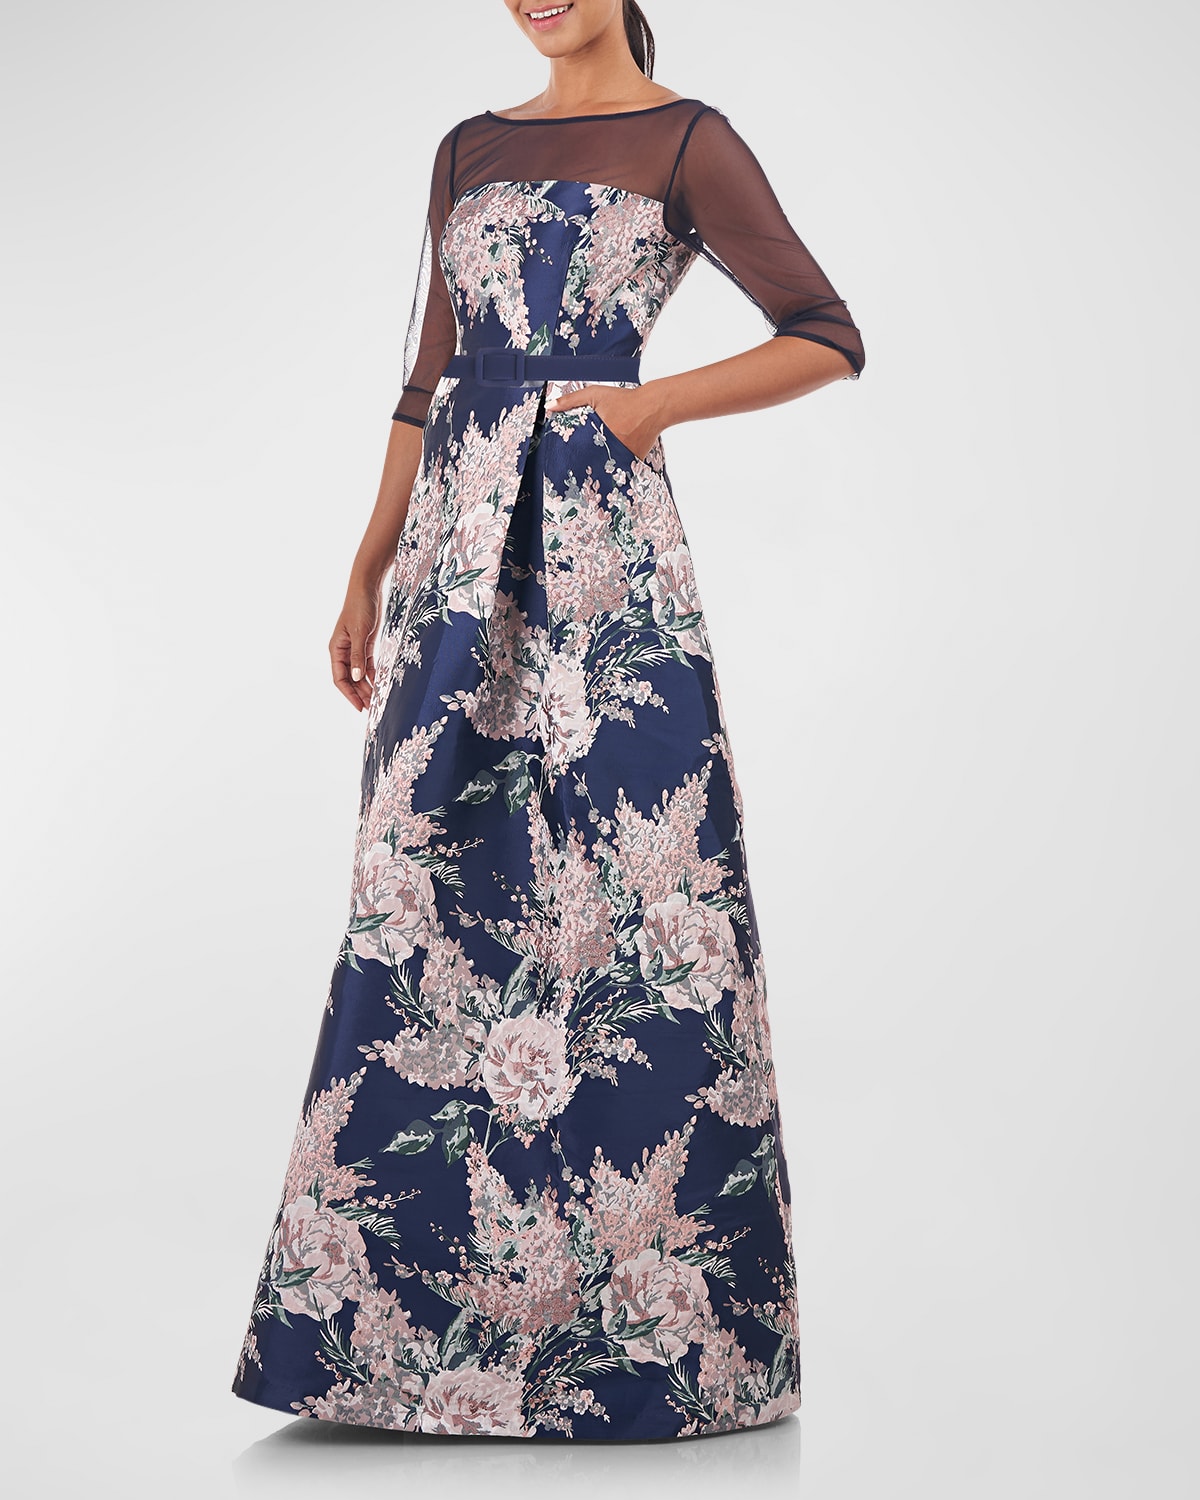 Kay Unger New York Pleated Floral Jacquard Illusion Gown